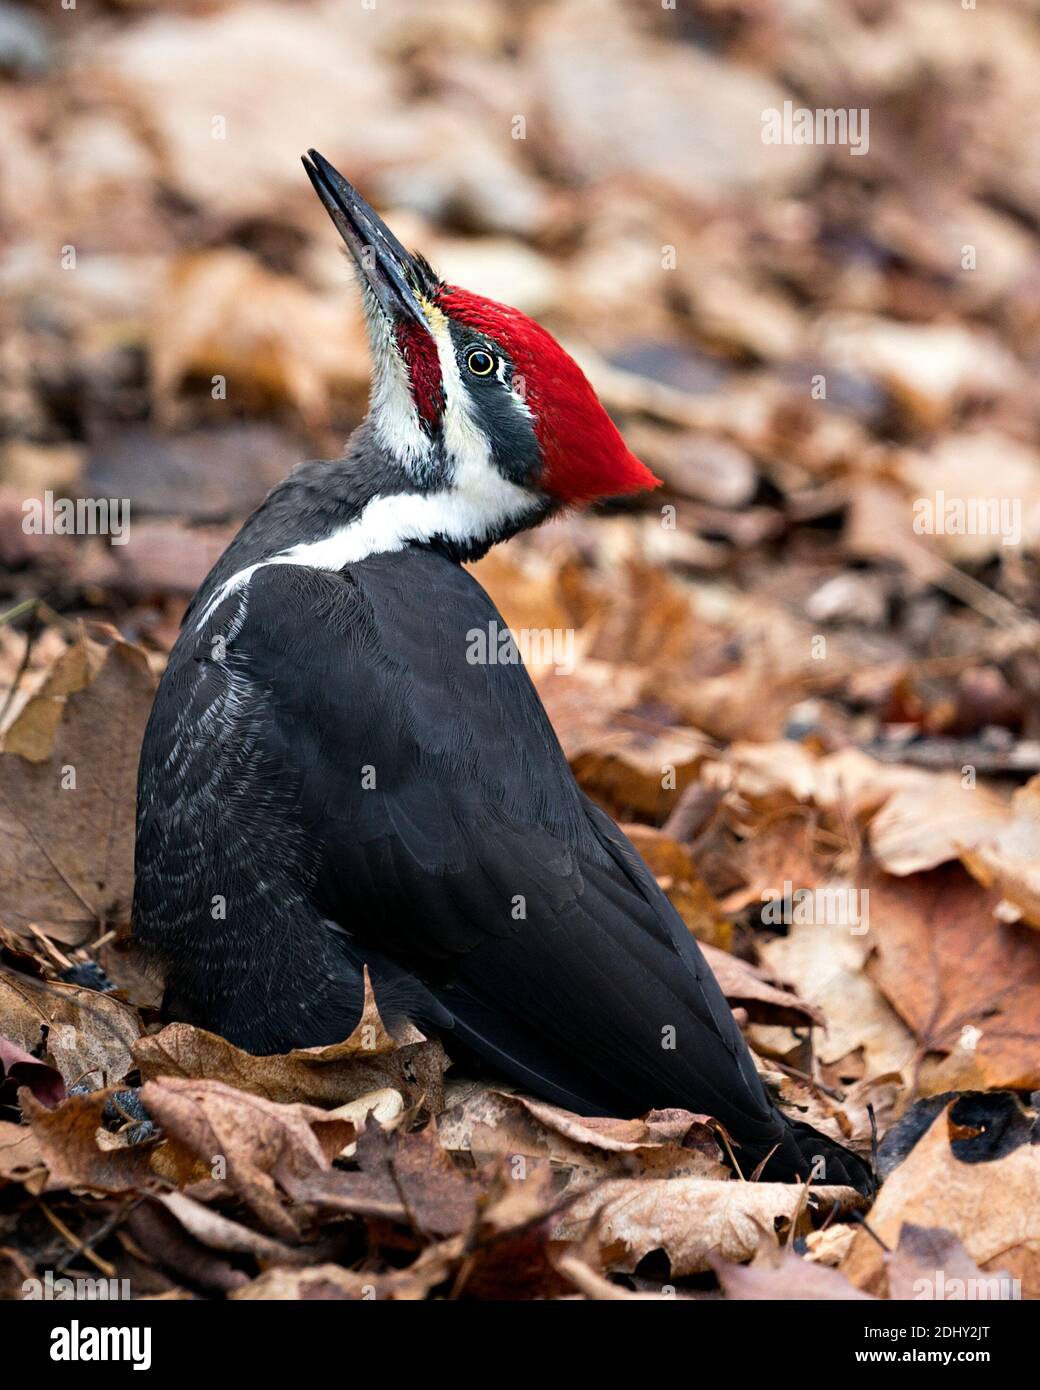 Woodpecker bird close-up profile view with a brown leaves background in its environment and habitat. Woodpecker stock photos. Image. Picture. Portrait Stock Photo